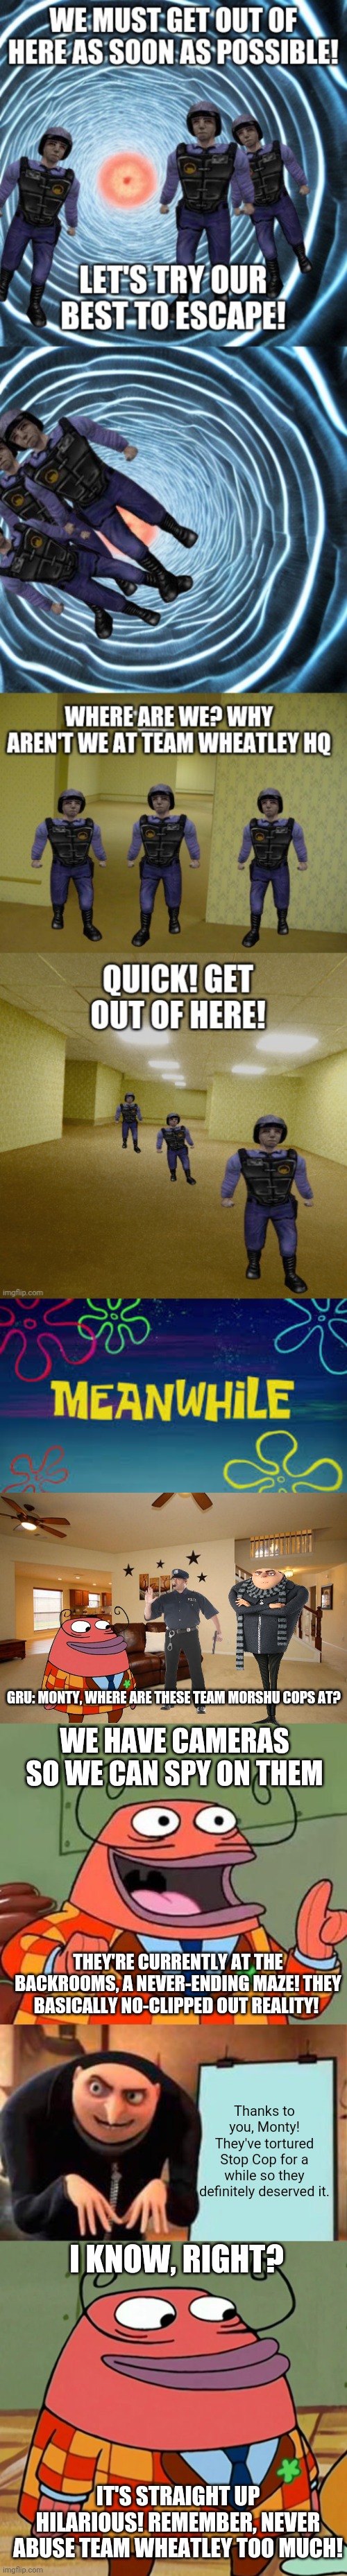 All of the Backrooms entities are now apart of Team Wheatley. | GRU: MONTY, WHERE ARE THESE TEAM MORSHU COPS AT? WE HAVE CAMERAS SO WE CAN SPY ON THEM; THEY'RE CURRENTLY AT THE BACKROOMS, A NEVER-ENDING MAZE! THEY BASICALLY NO-CLIPPED OUT REALITY! Thanks to you, Monty! They've tortured Stop Cop for a while so they definitely deserved it. I KNOW, RIGHT? IT'S STRAIGHT UP HILARIOUS! REMEMBER, NEVER ABUSE TEAM WHEATLEY TOO MUCH! | image tagged in living room ceiling fans,more like belongs in the trash,memes,gru's plan,monty p moneybags | made w/ Imgflip meme maker